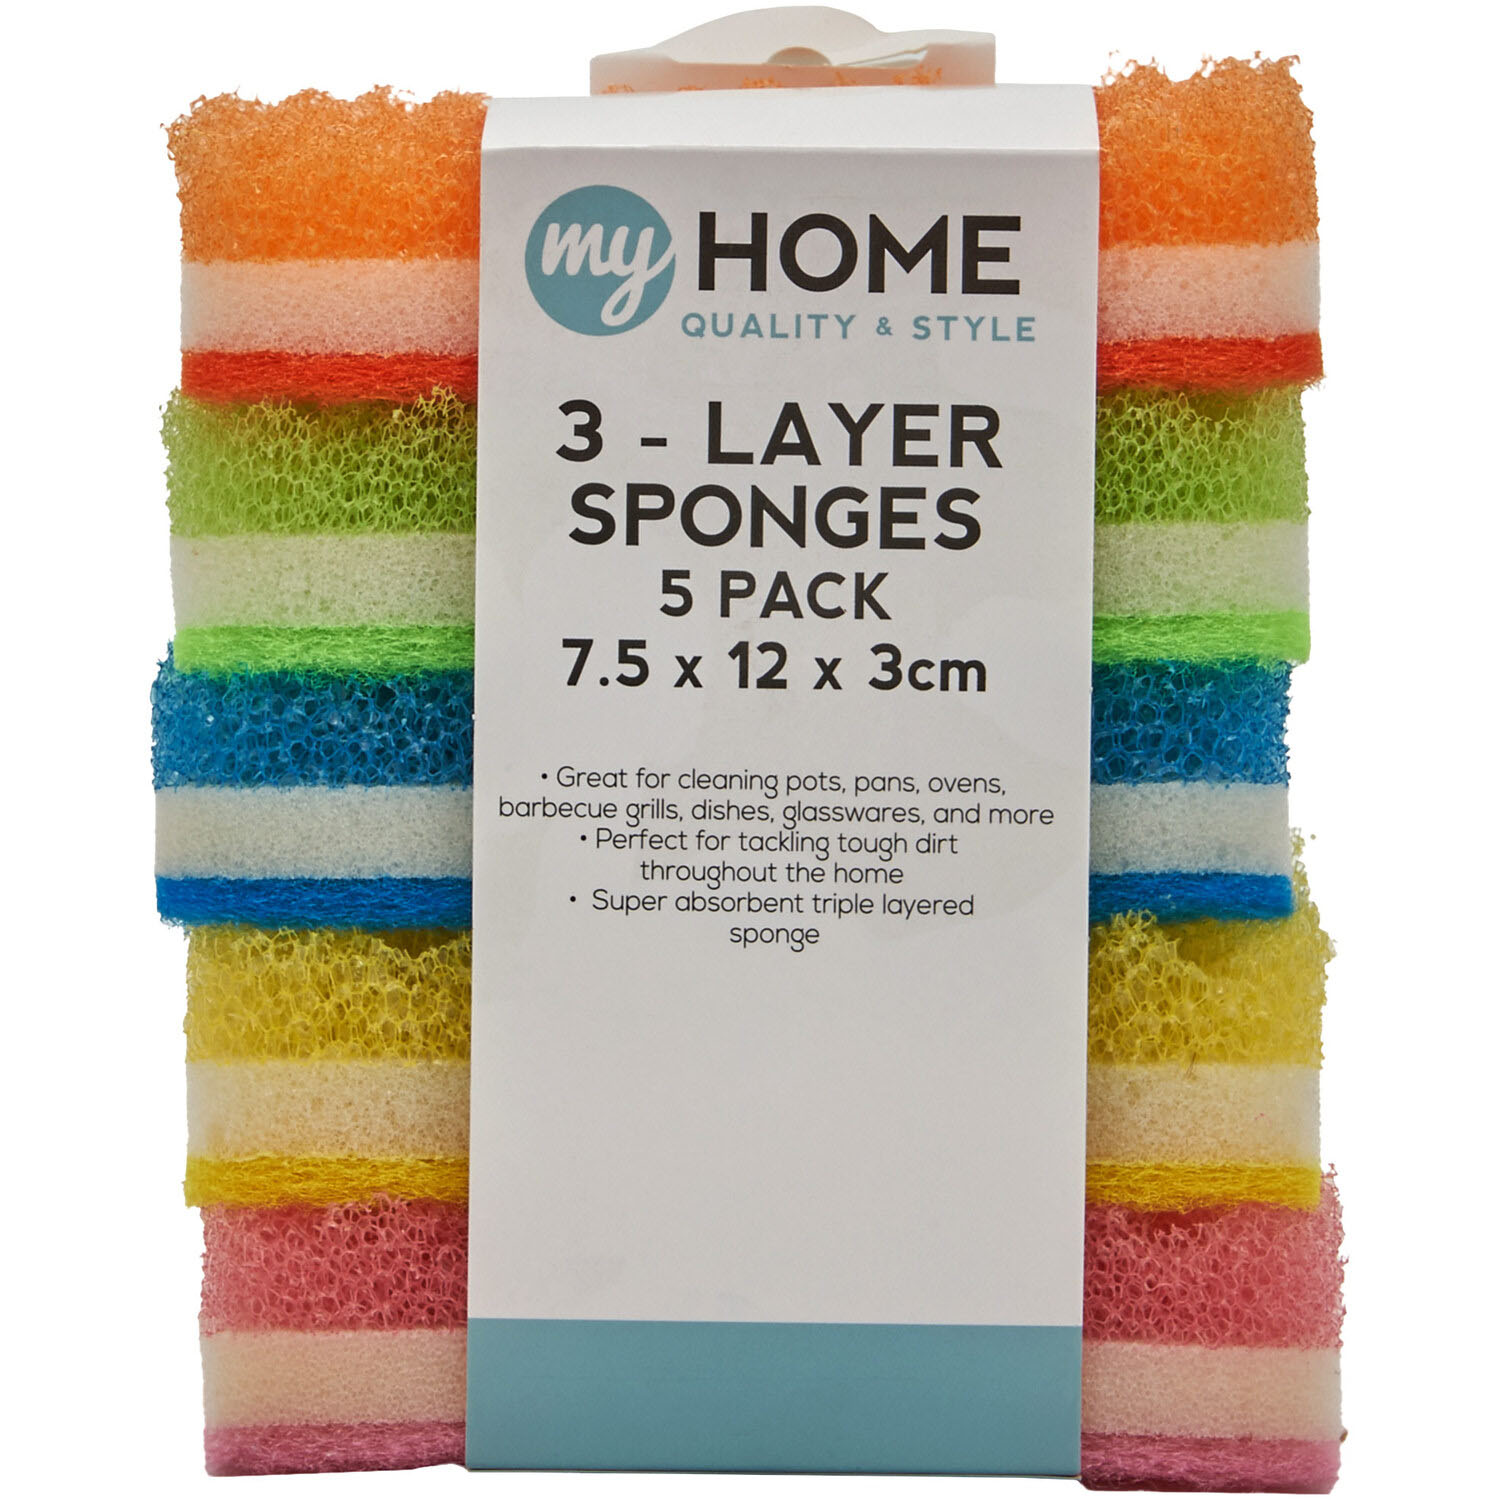 My Home 3 Layer Sponges 5 Pack Image 2